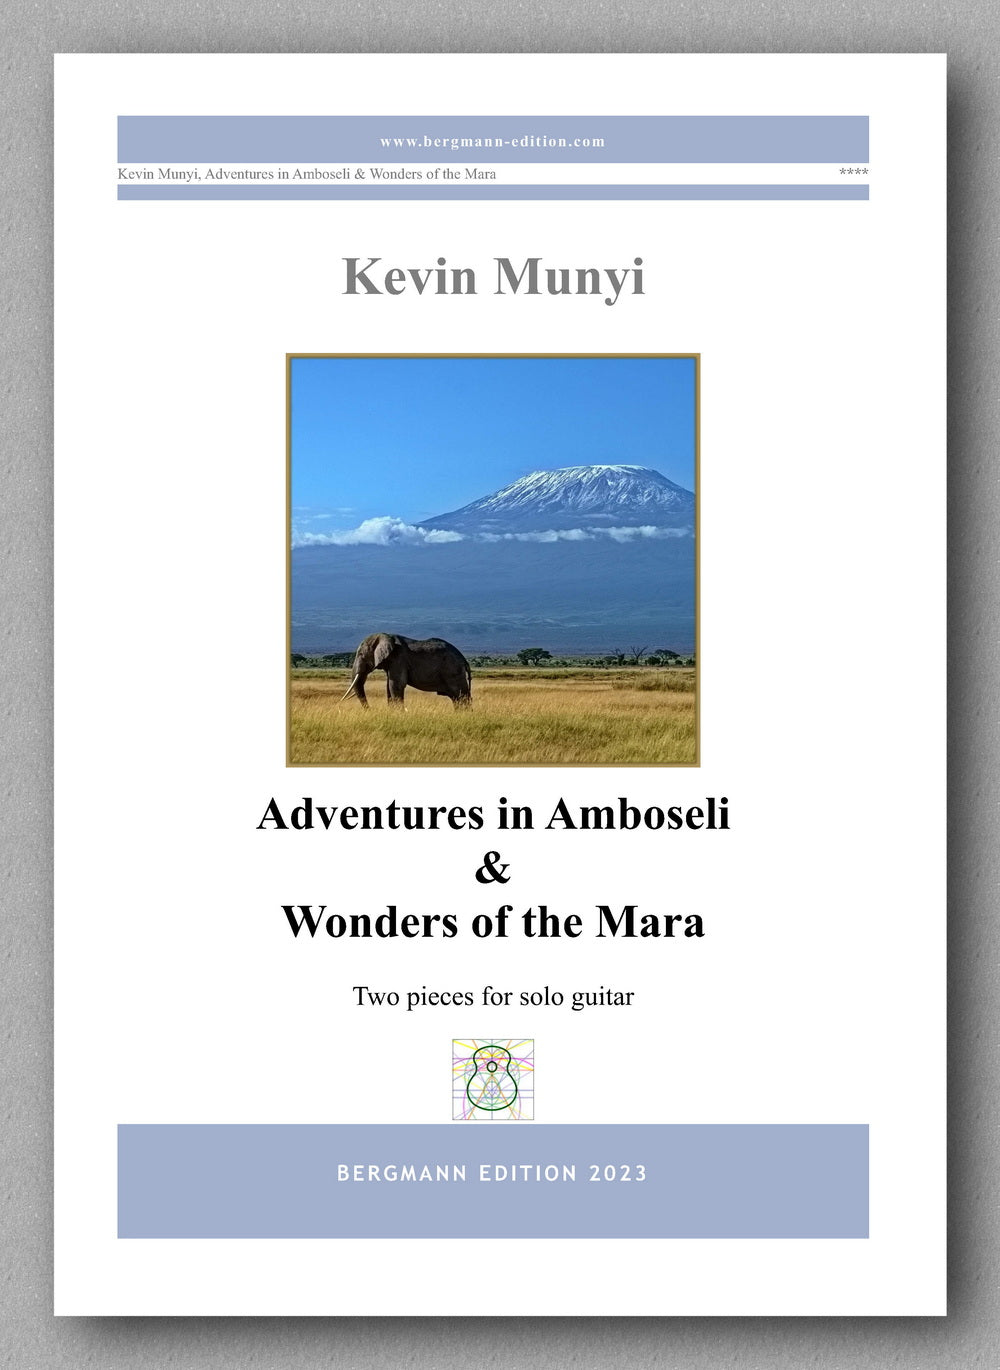 Kevin Munyi,  Adventures in Amboseli & Wonders of the Mara - preview of the cover